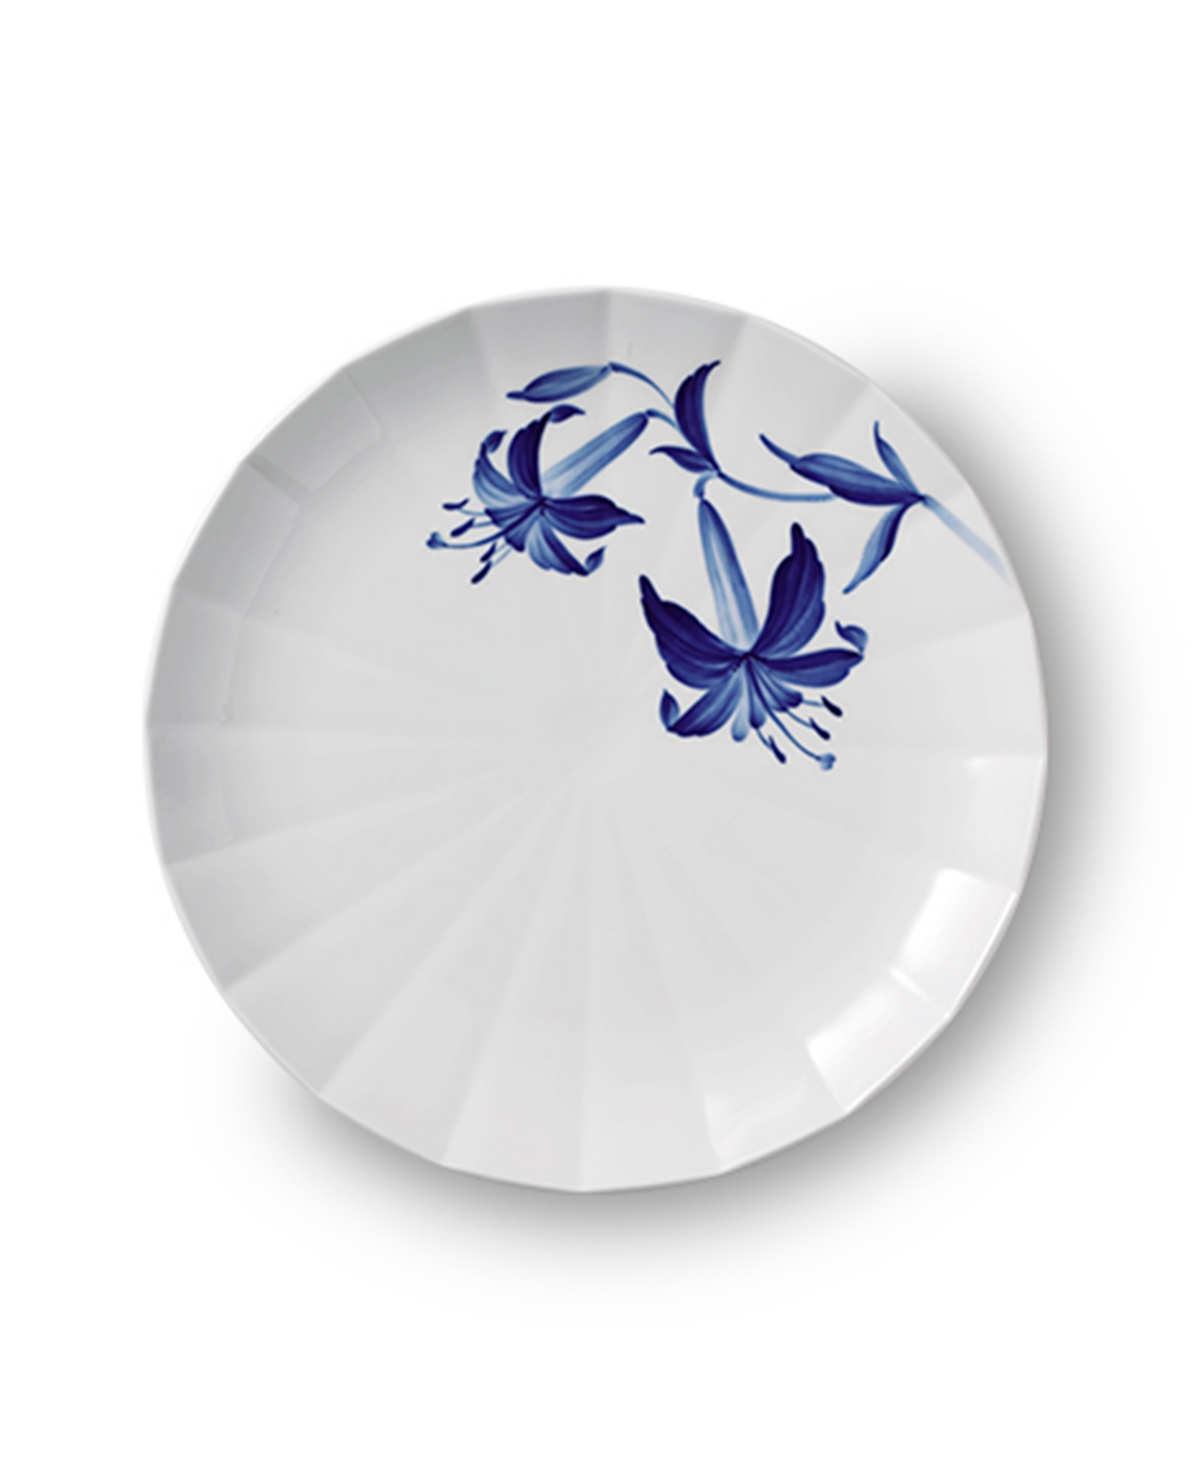 Blomst Dinner Plate Lily, 10.75" - Blue and White